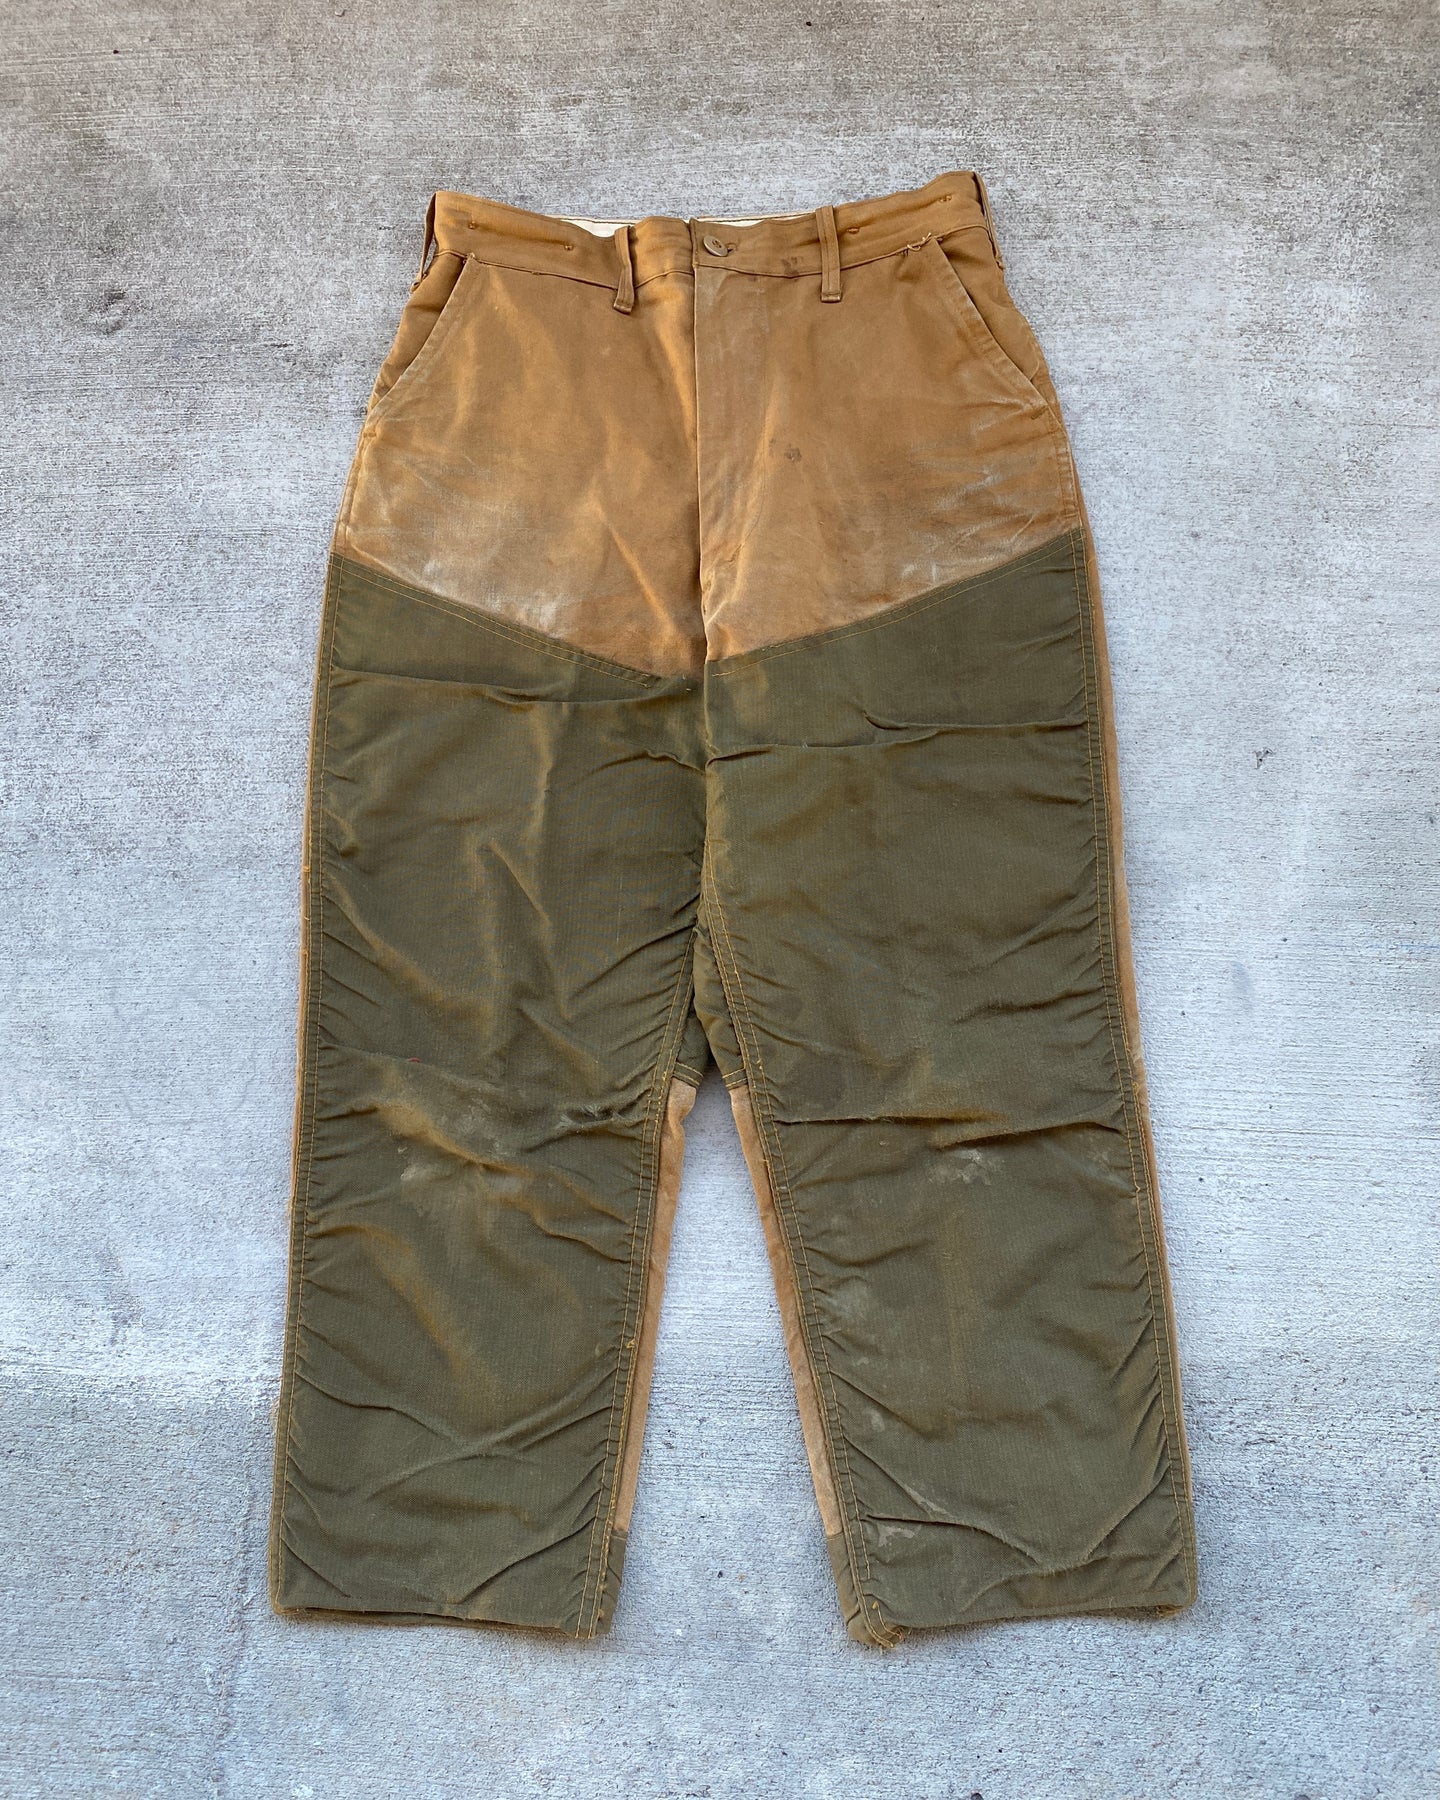 1950s Double Knee Hunting Pants - Size 32 x 27